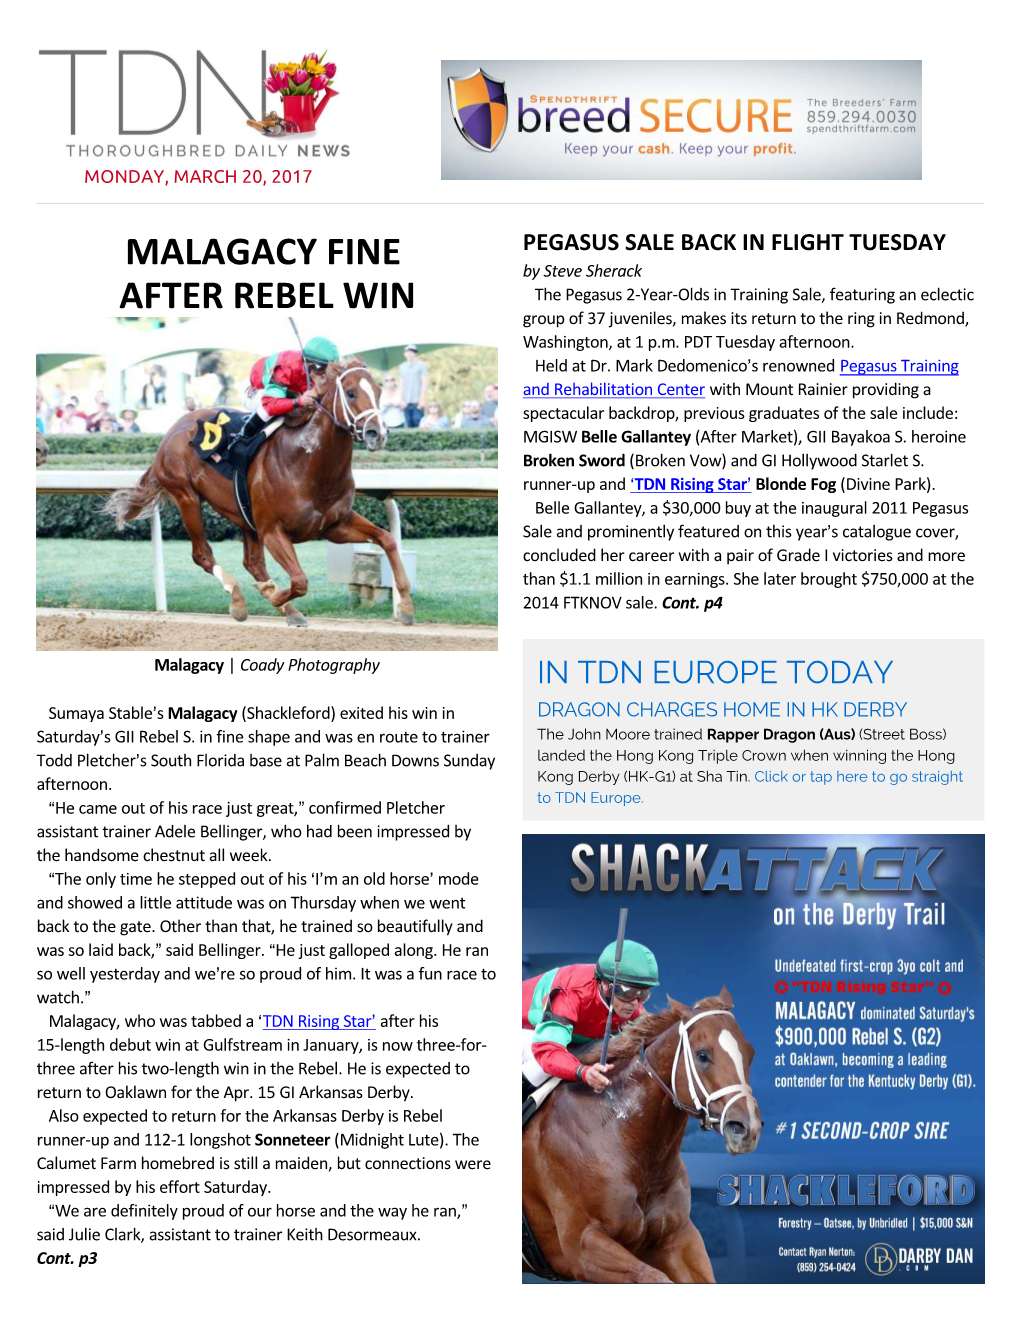 Malagacy Fine After Rebel Win (Cont